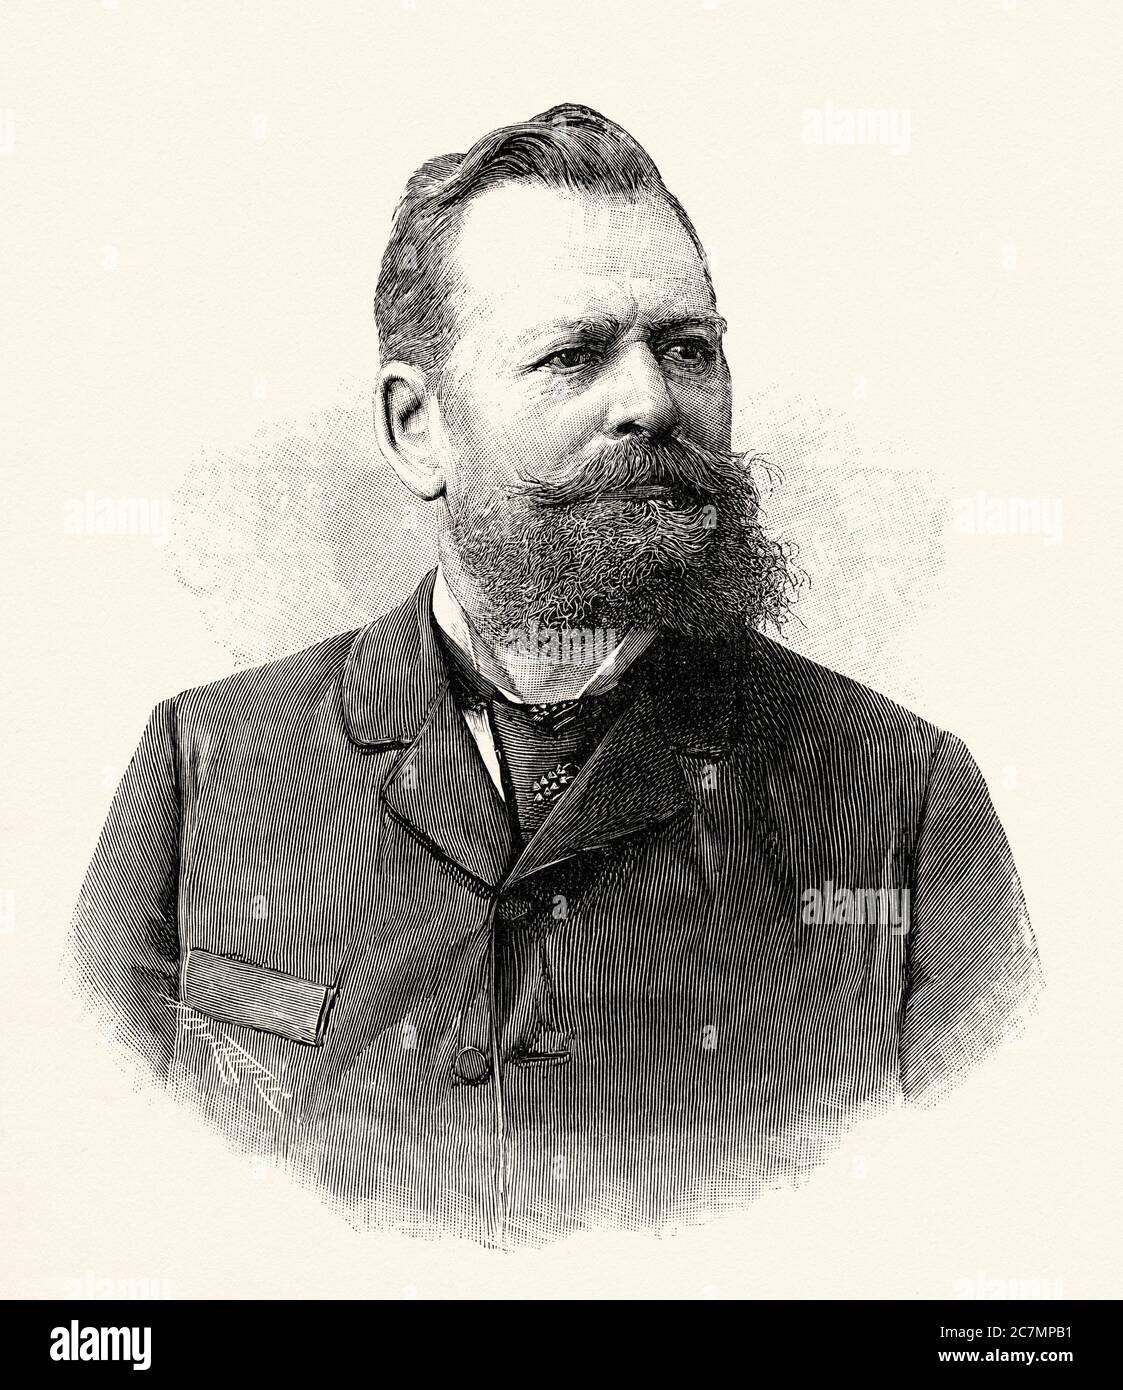 Peter Paul Mauser (1838 - 1914) was a German arms designer and politician and designer. He designed the famous Mauser rifle in 1871 and then the Mauser 98, considered the best military rifle in history. From La Ilustracion Española y Americana 1895 Stock Photo